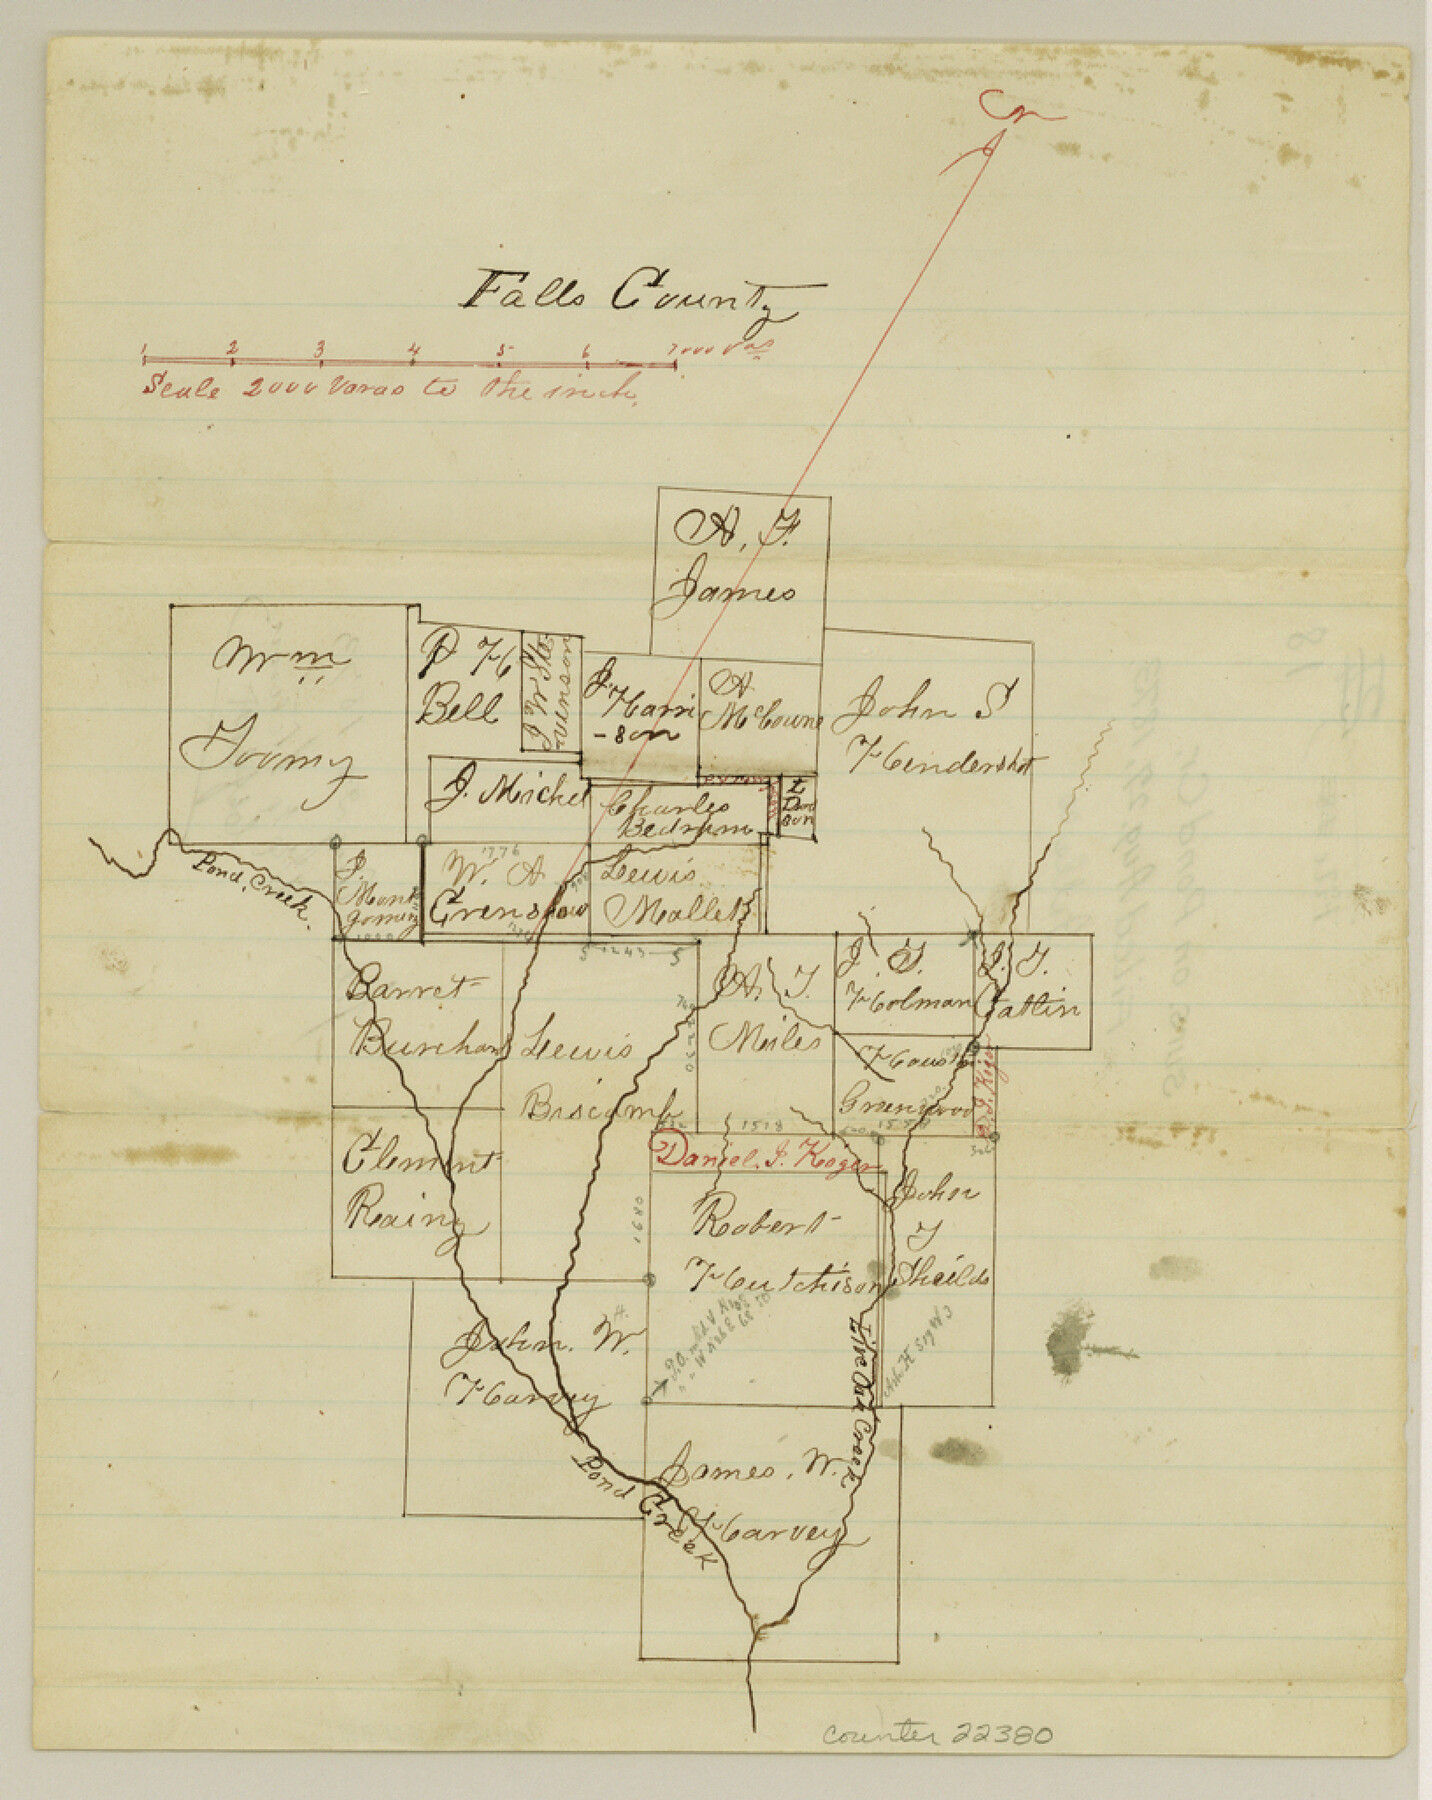 22380, Falls County Sketch File 18, General Map Collection